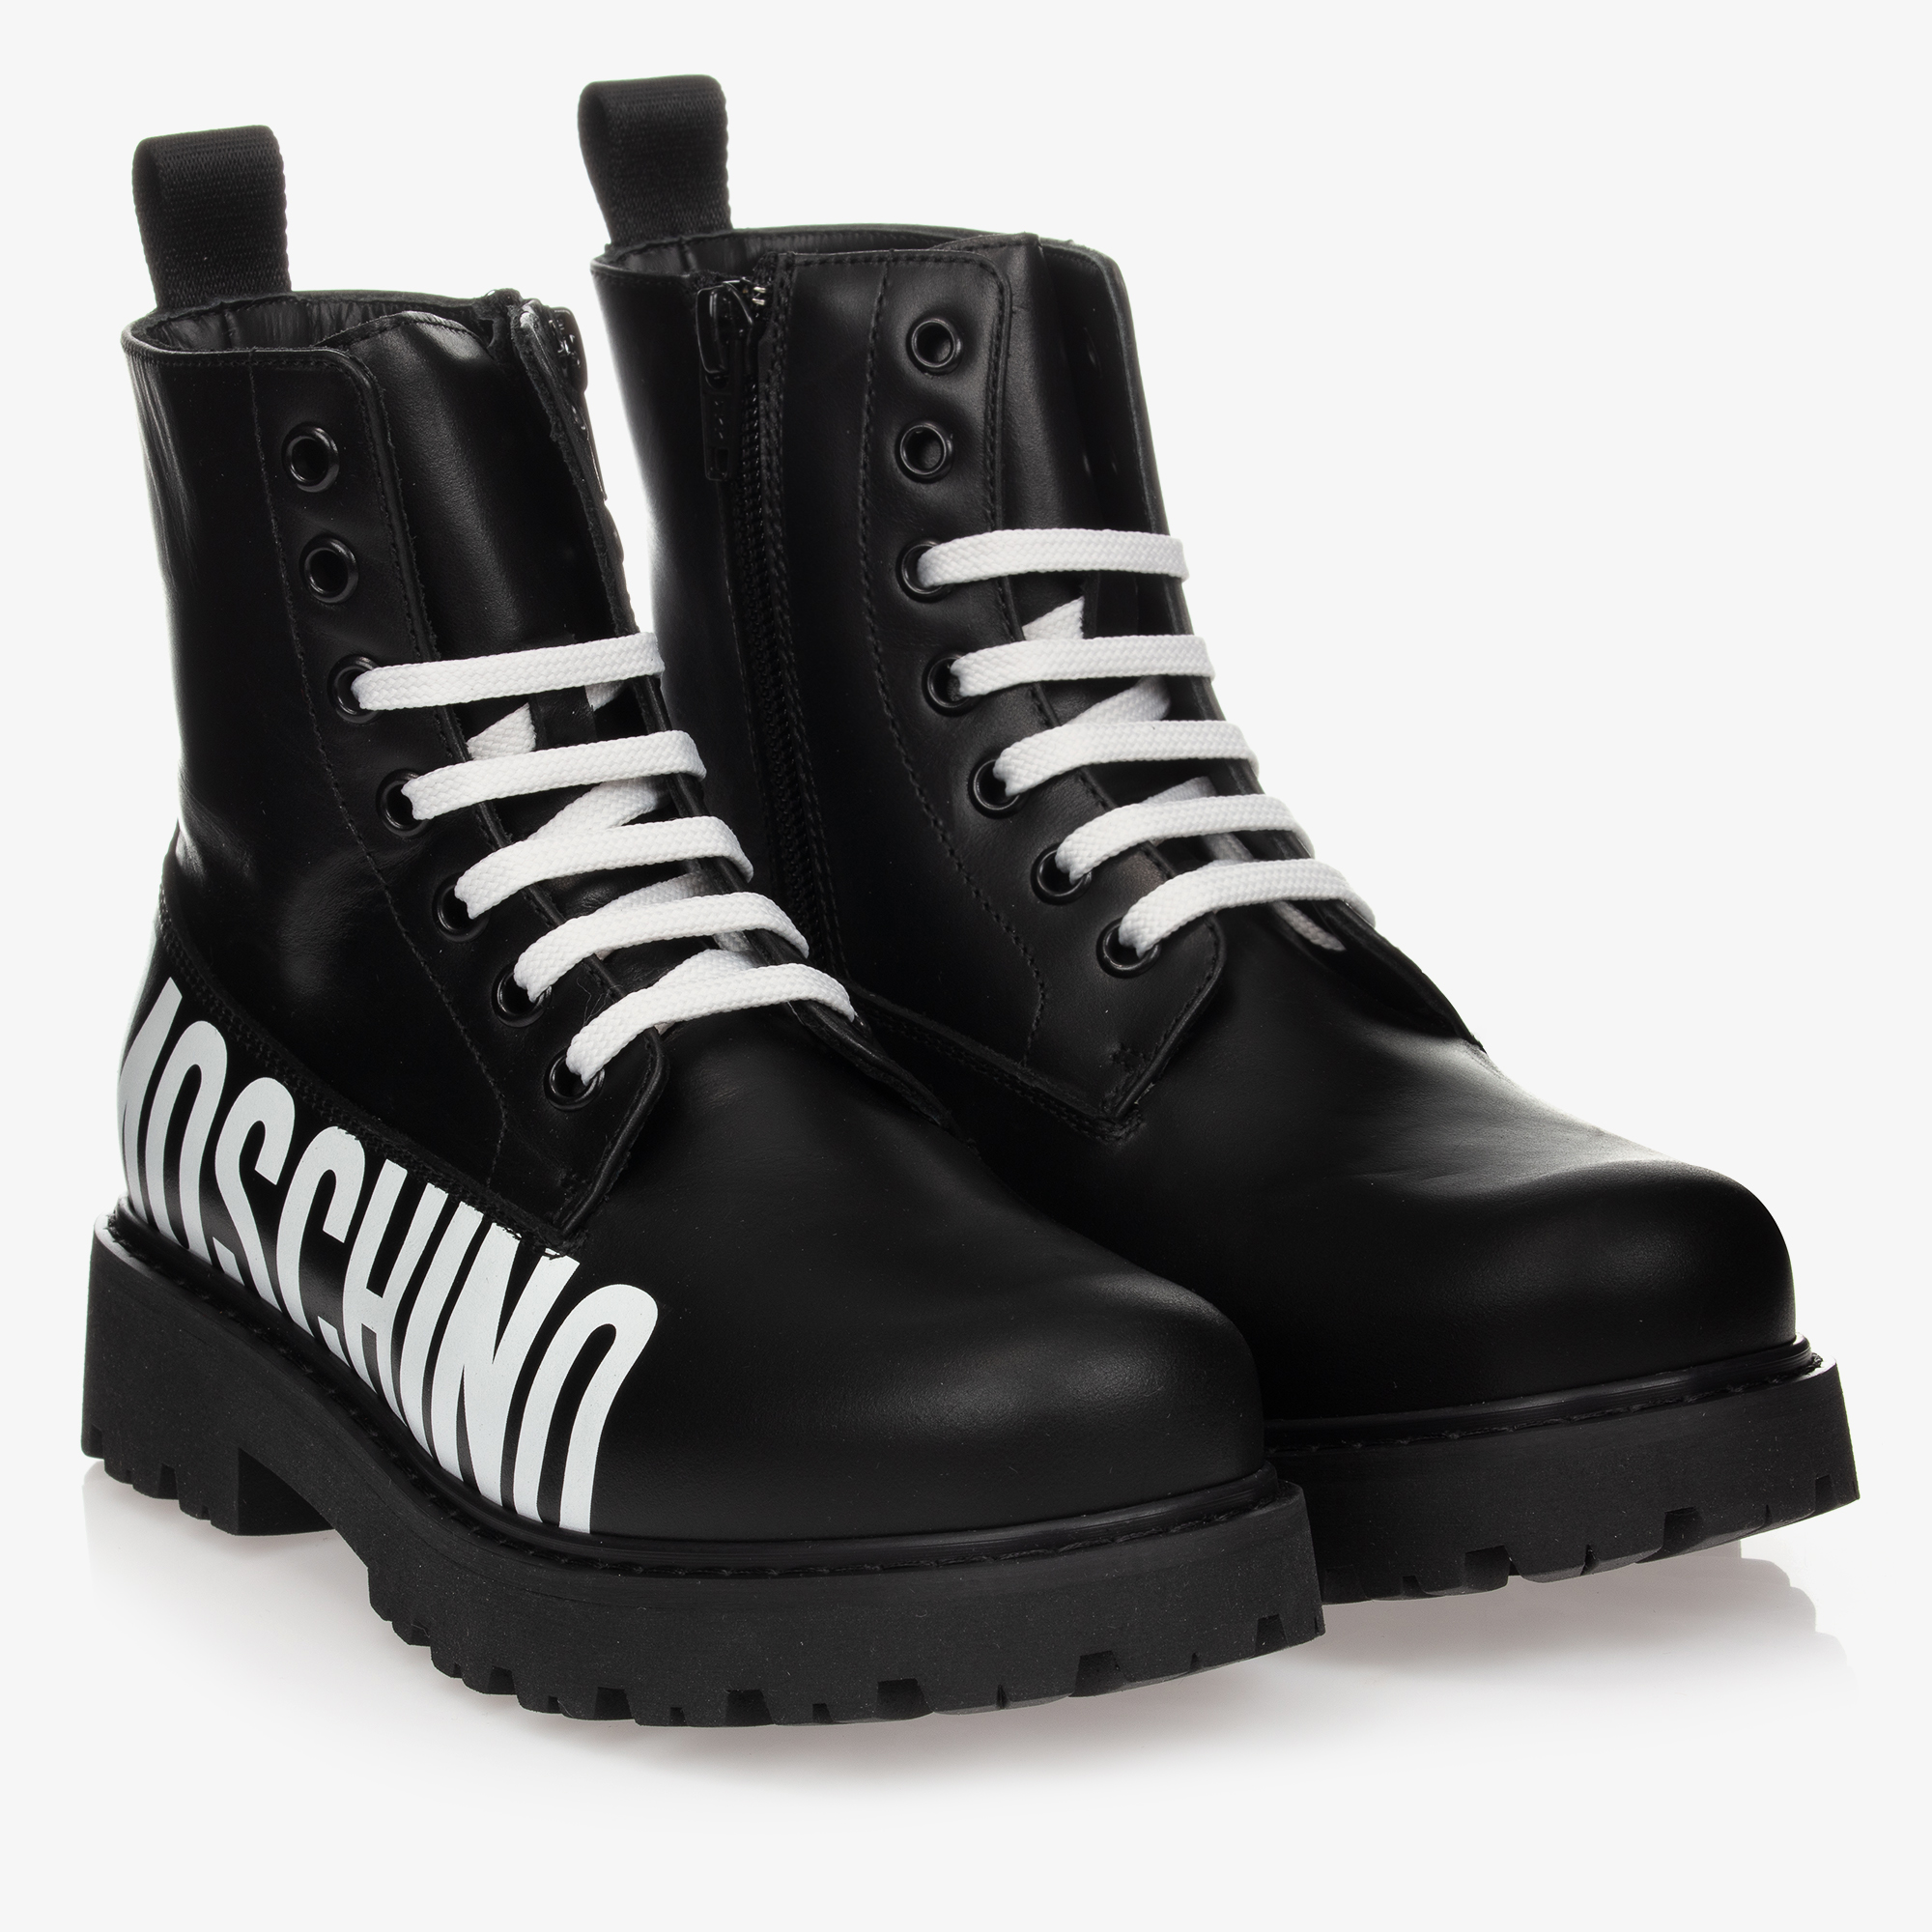 Black Leather Boots For Teen Girls